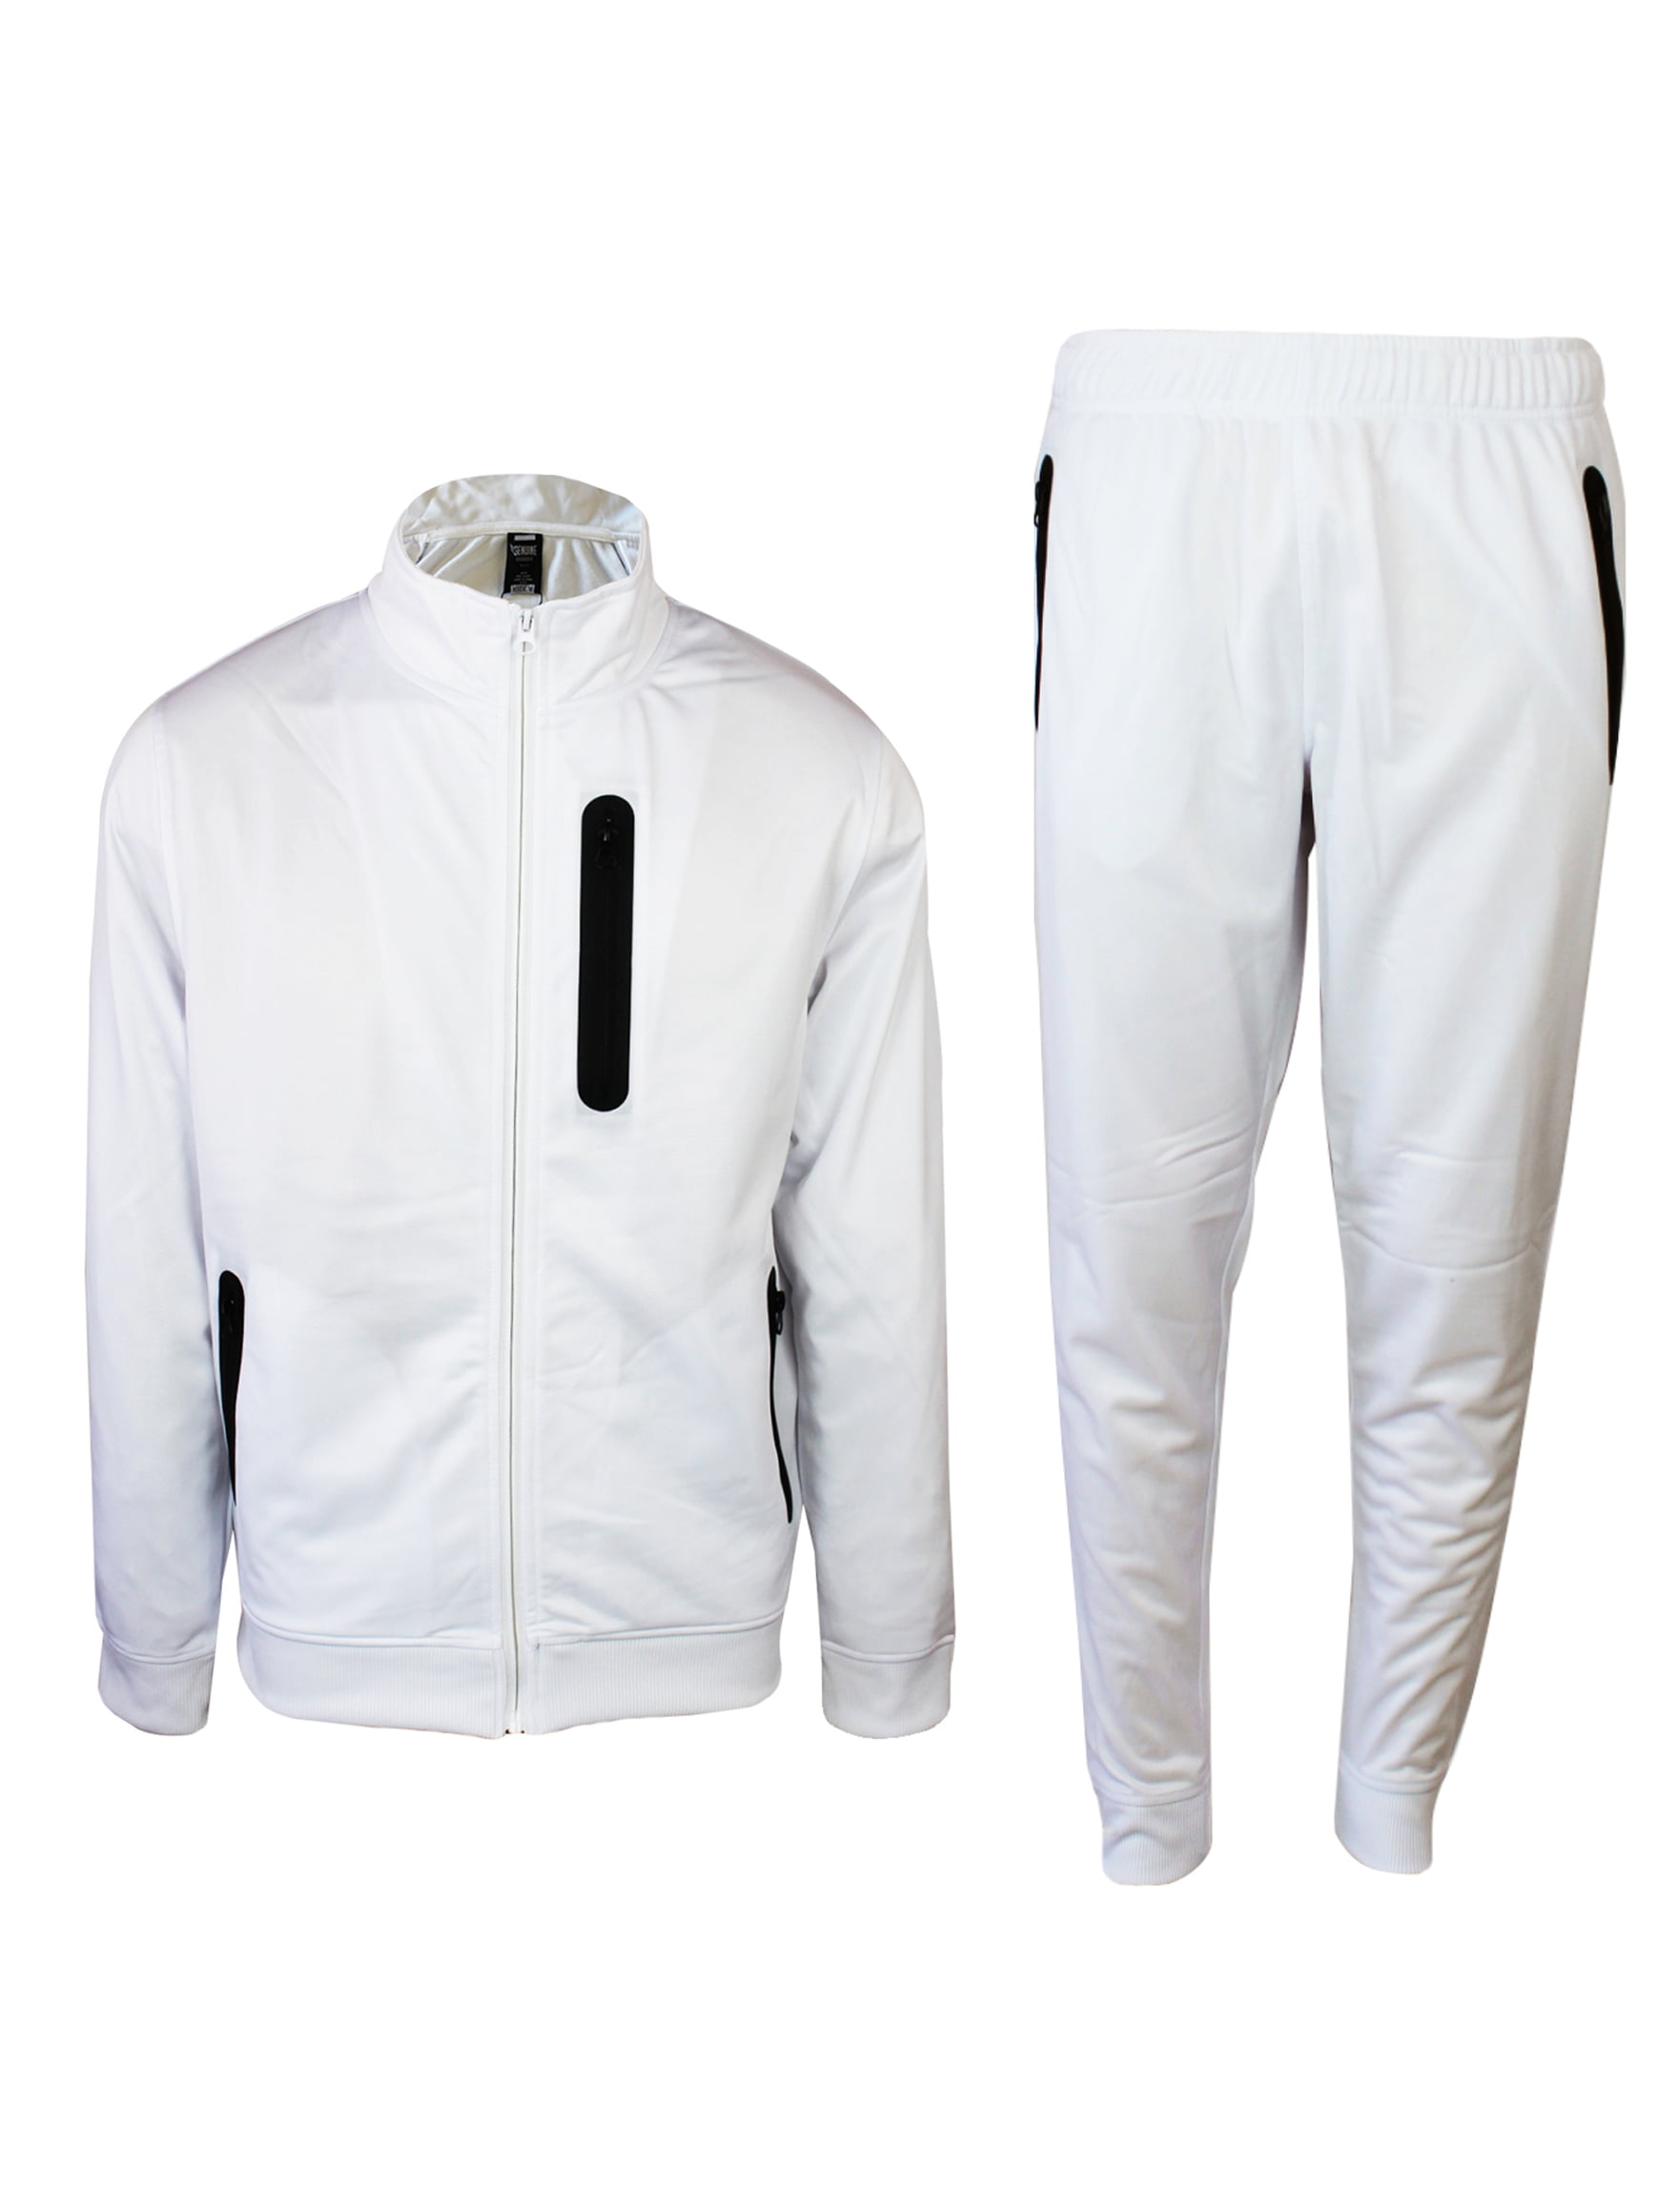 Mens Athletic Tracksuit Set Full Zip Casual Sports Jogging Gym Sweat Suits